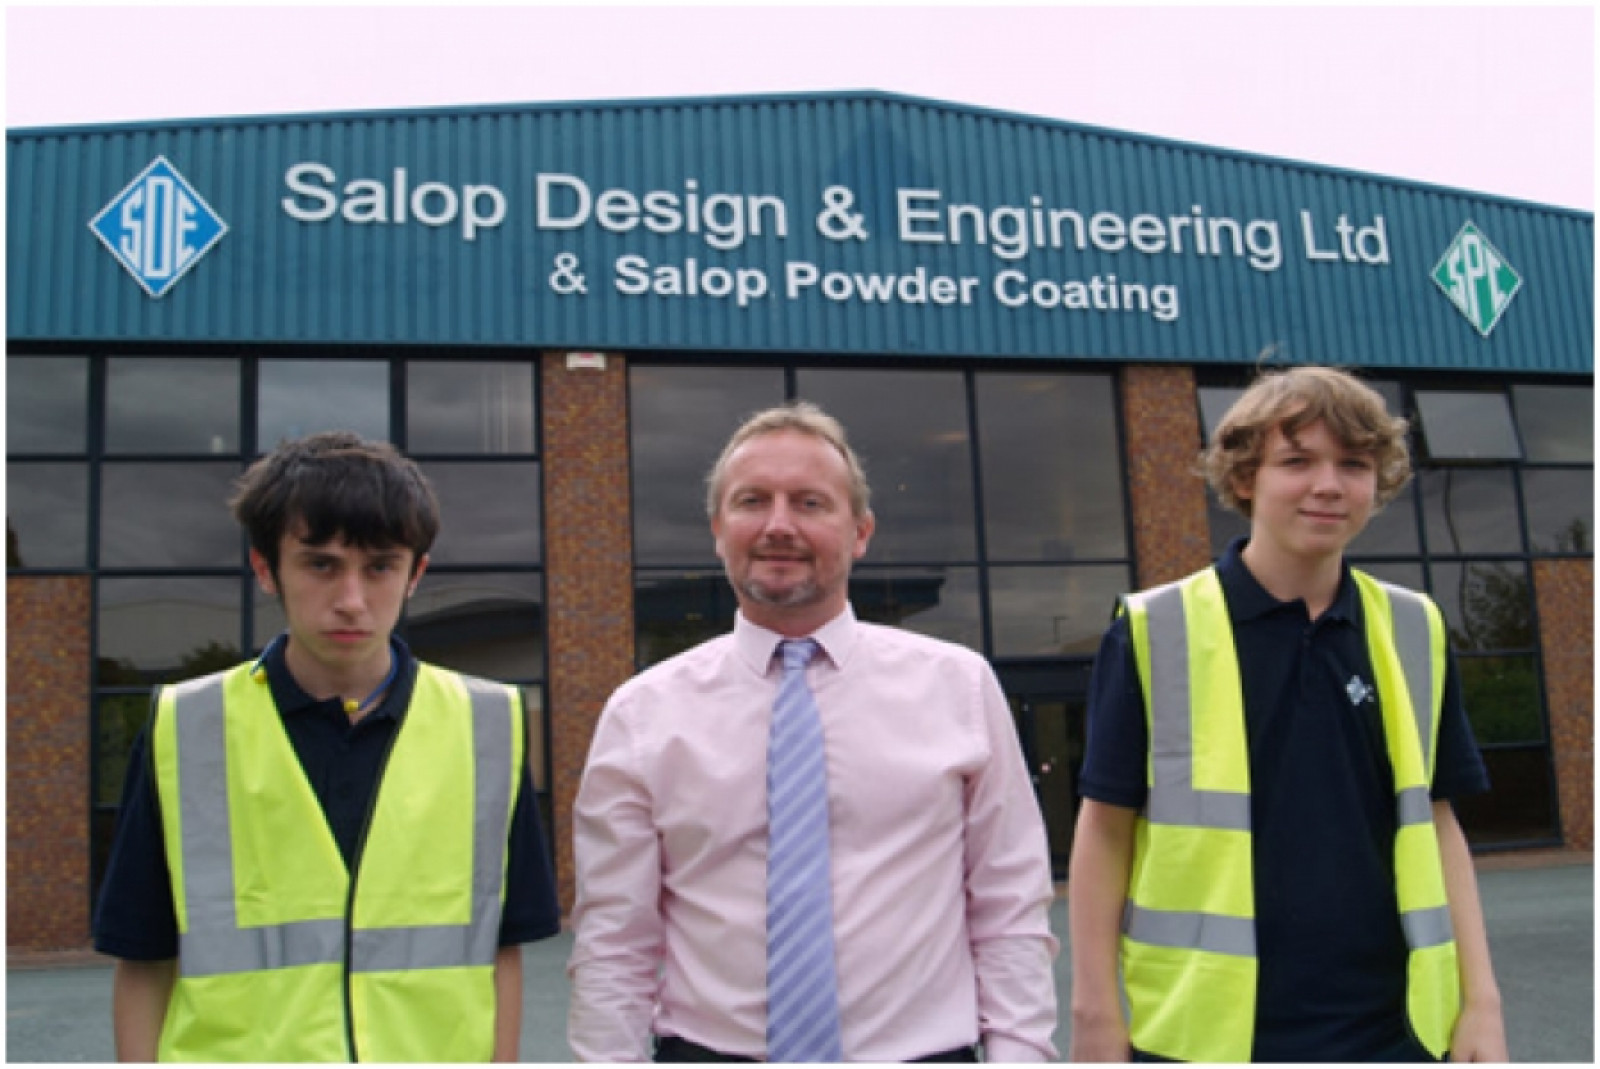 Students enjoy Work Experience at Salop Design & Engineering